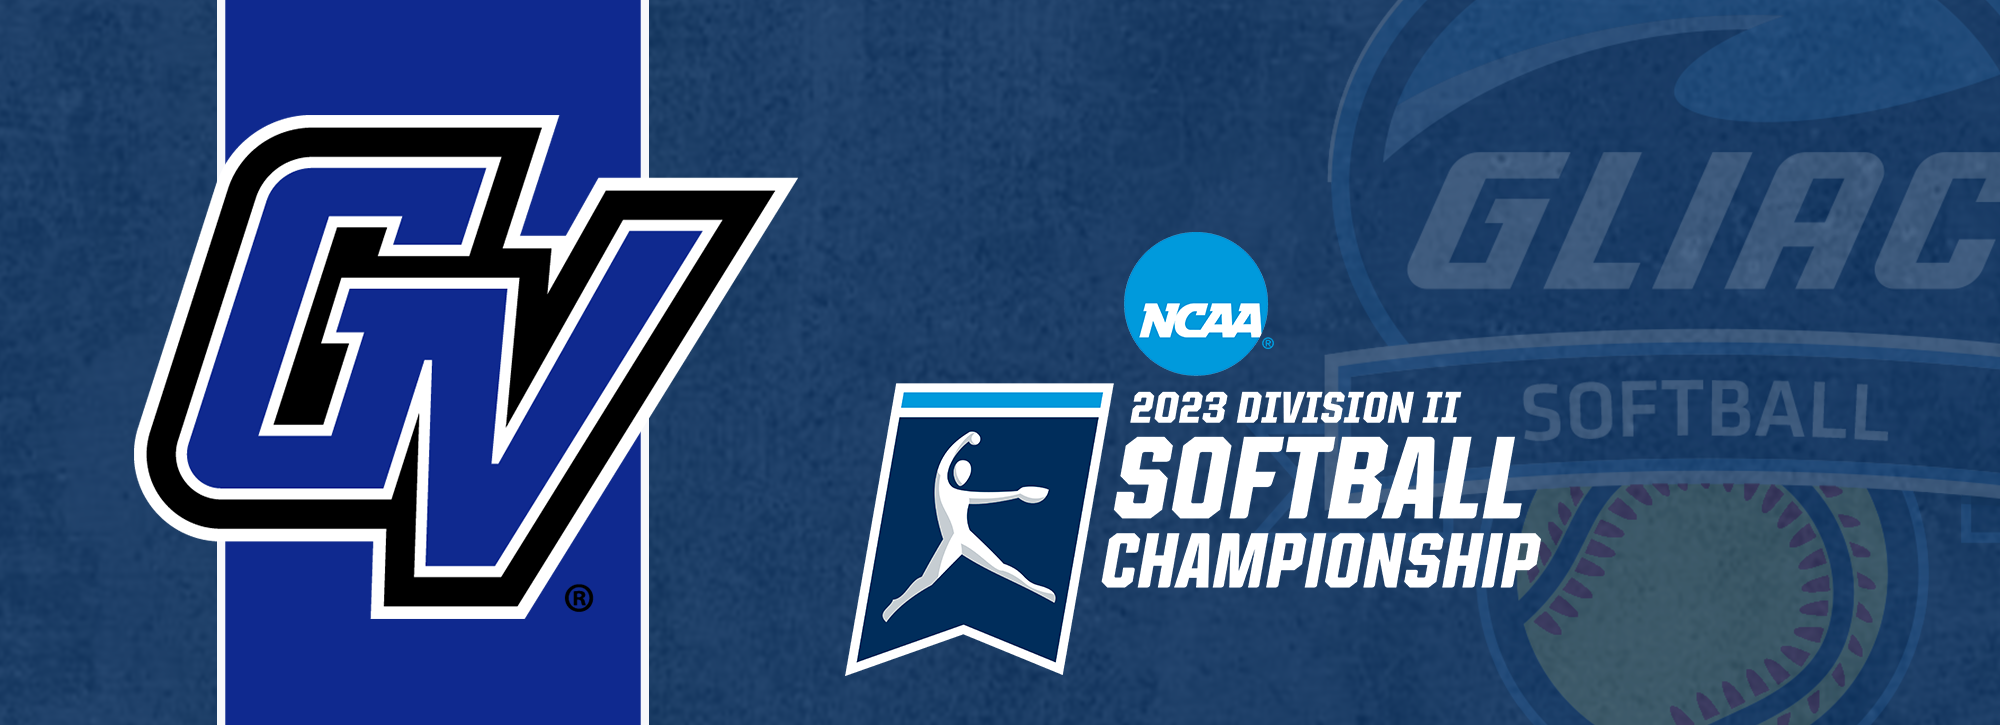 Grand Valley State softball upsets No. 1 UT Tyler; moves to 2-0 in World Series play